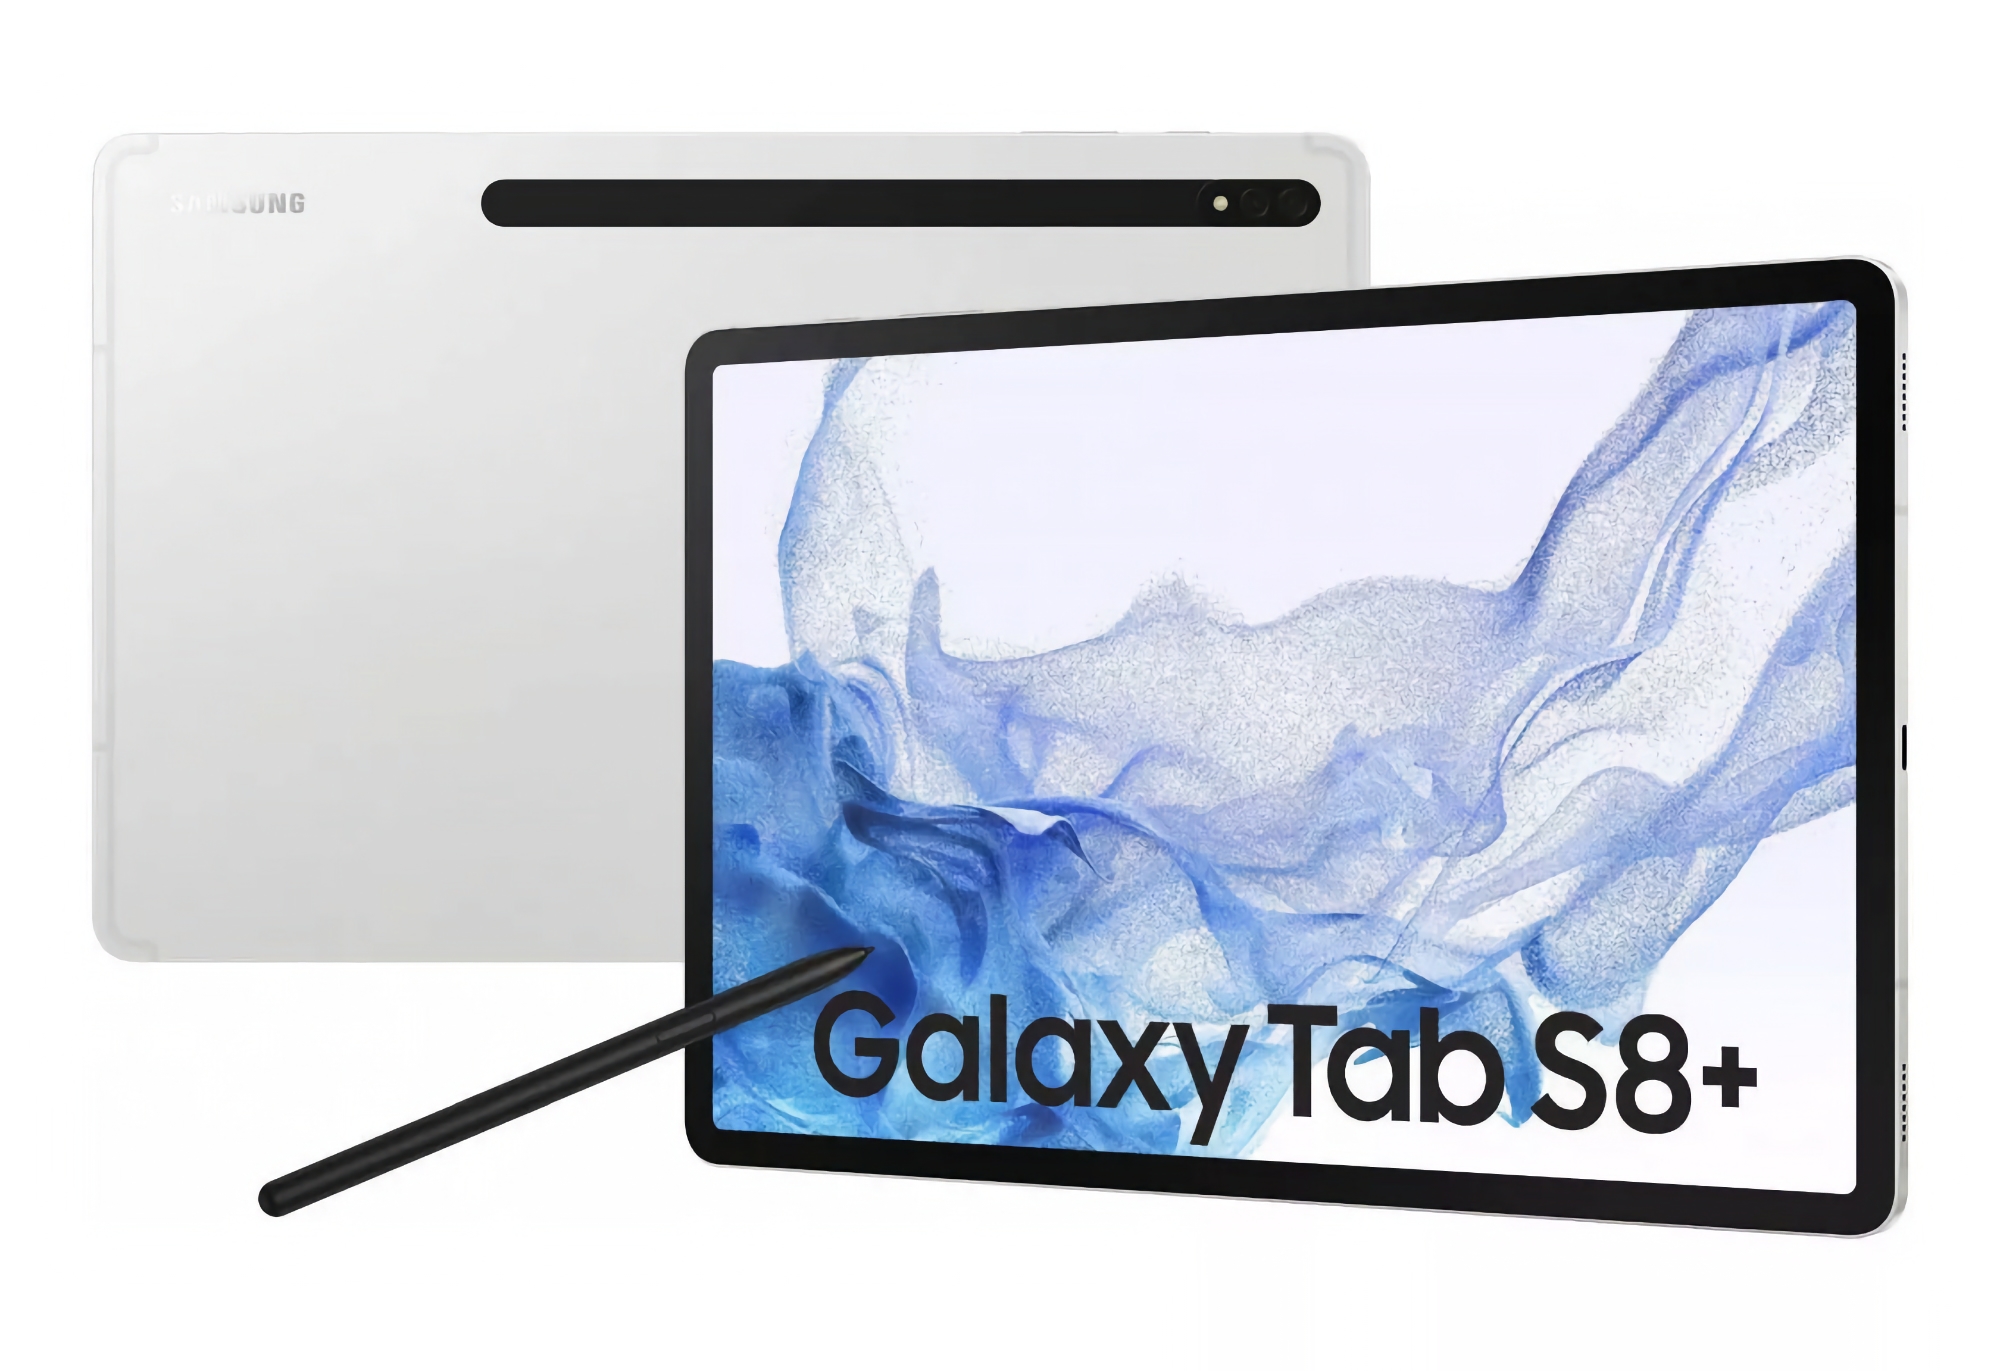 Samsung Galaxy Tab S8+ with Wi-Fi and 128GB storage can be bought on Amazon at a discounted price of $300